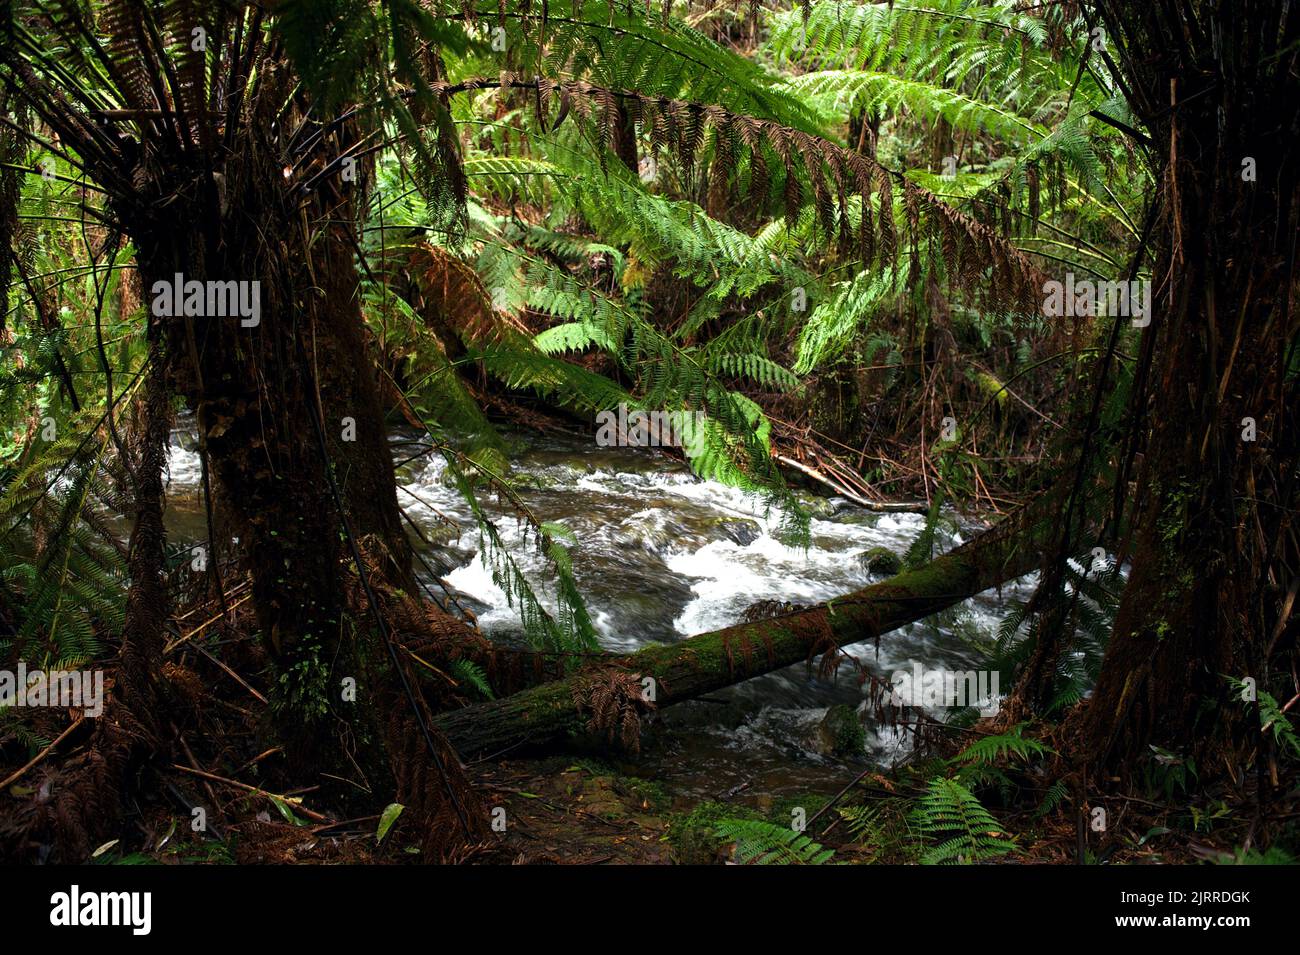 This is Badger Creek, above Badger Weir, near Healesville in Victoria, Australia. It's in temperate rain forest - and it was really wet! Stock Photo